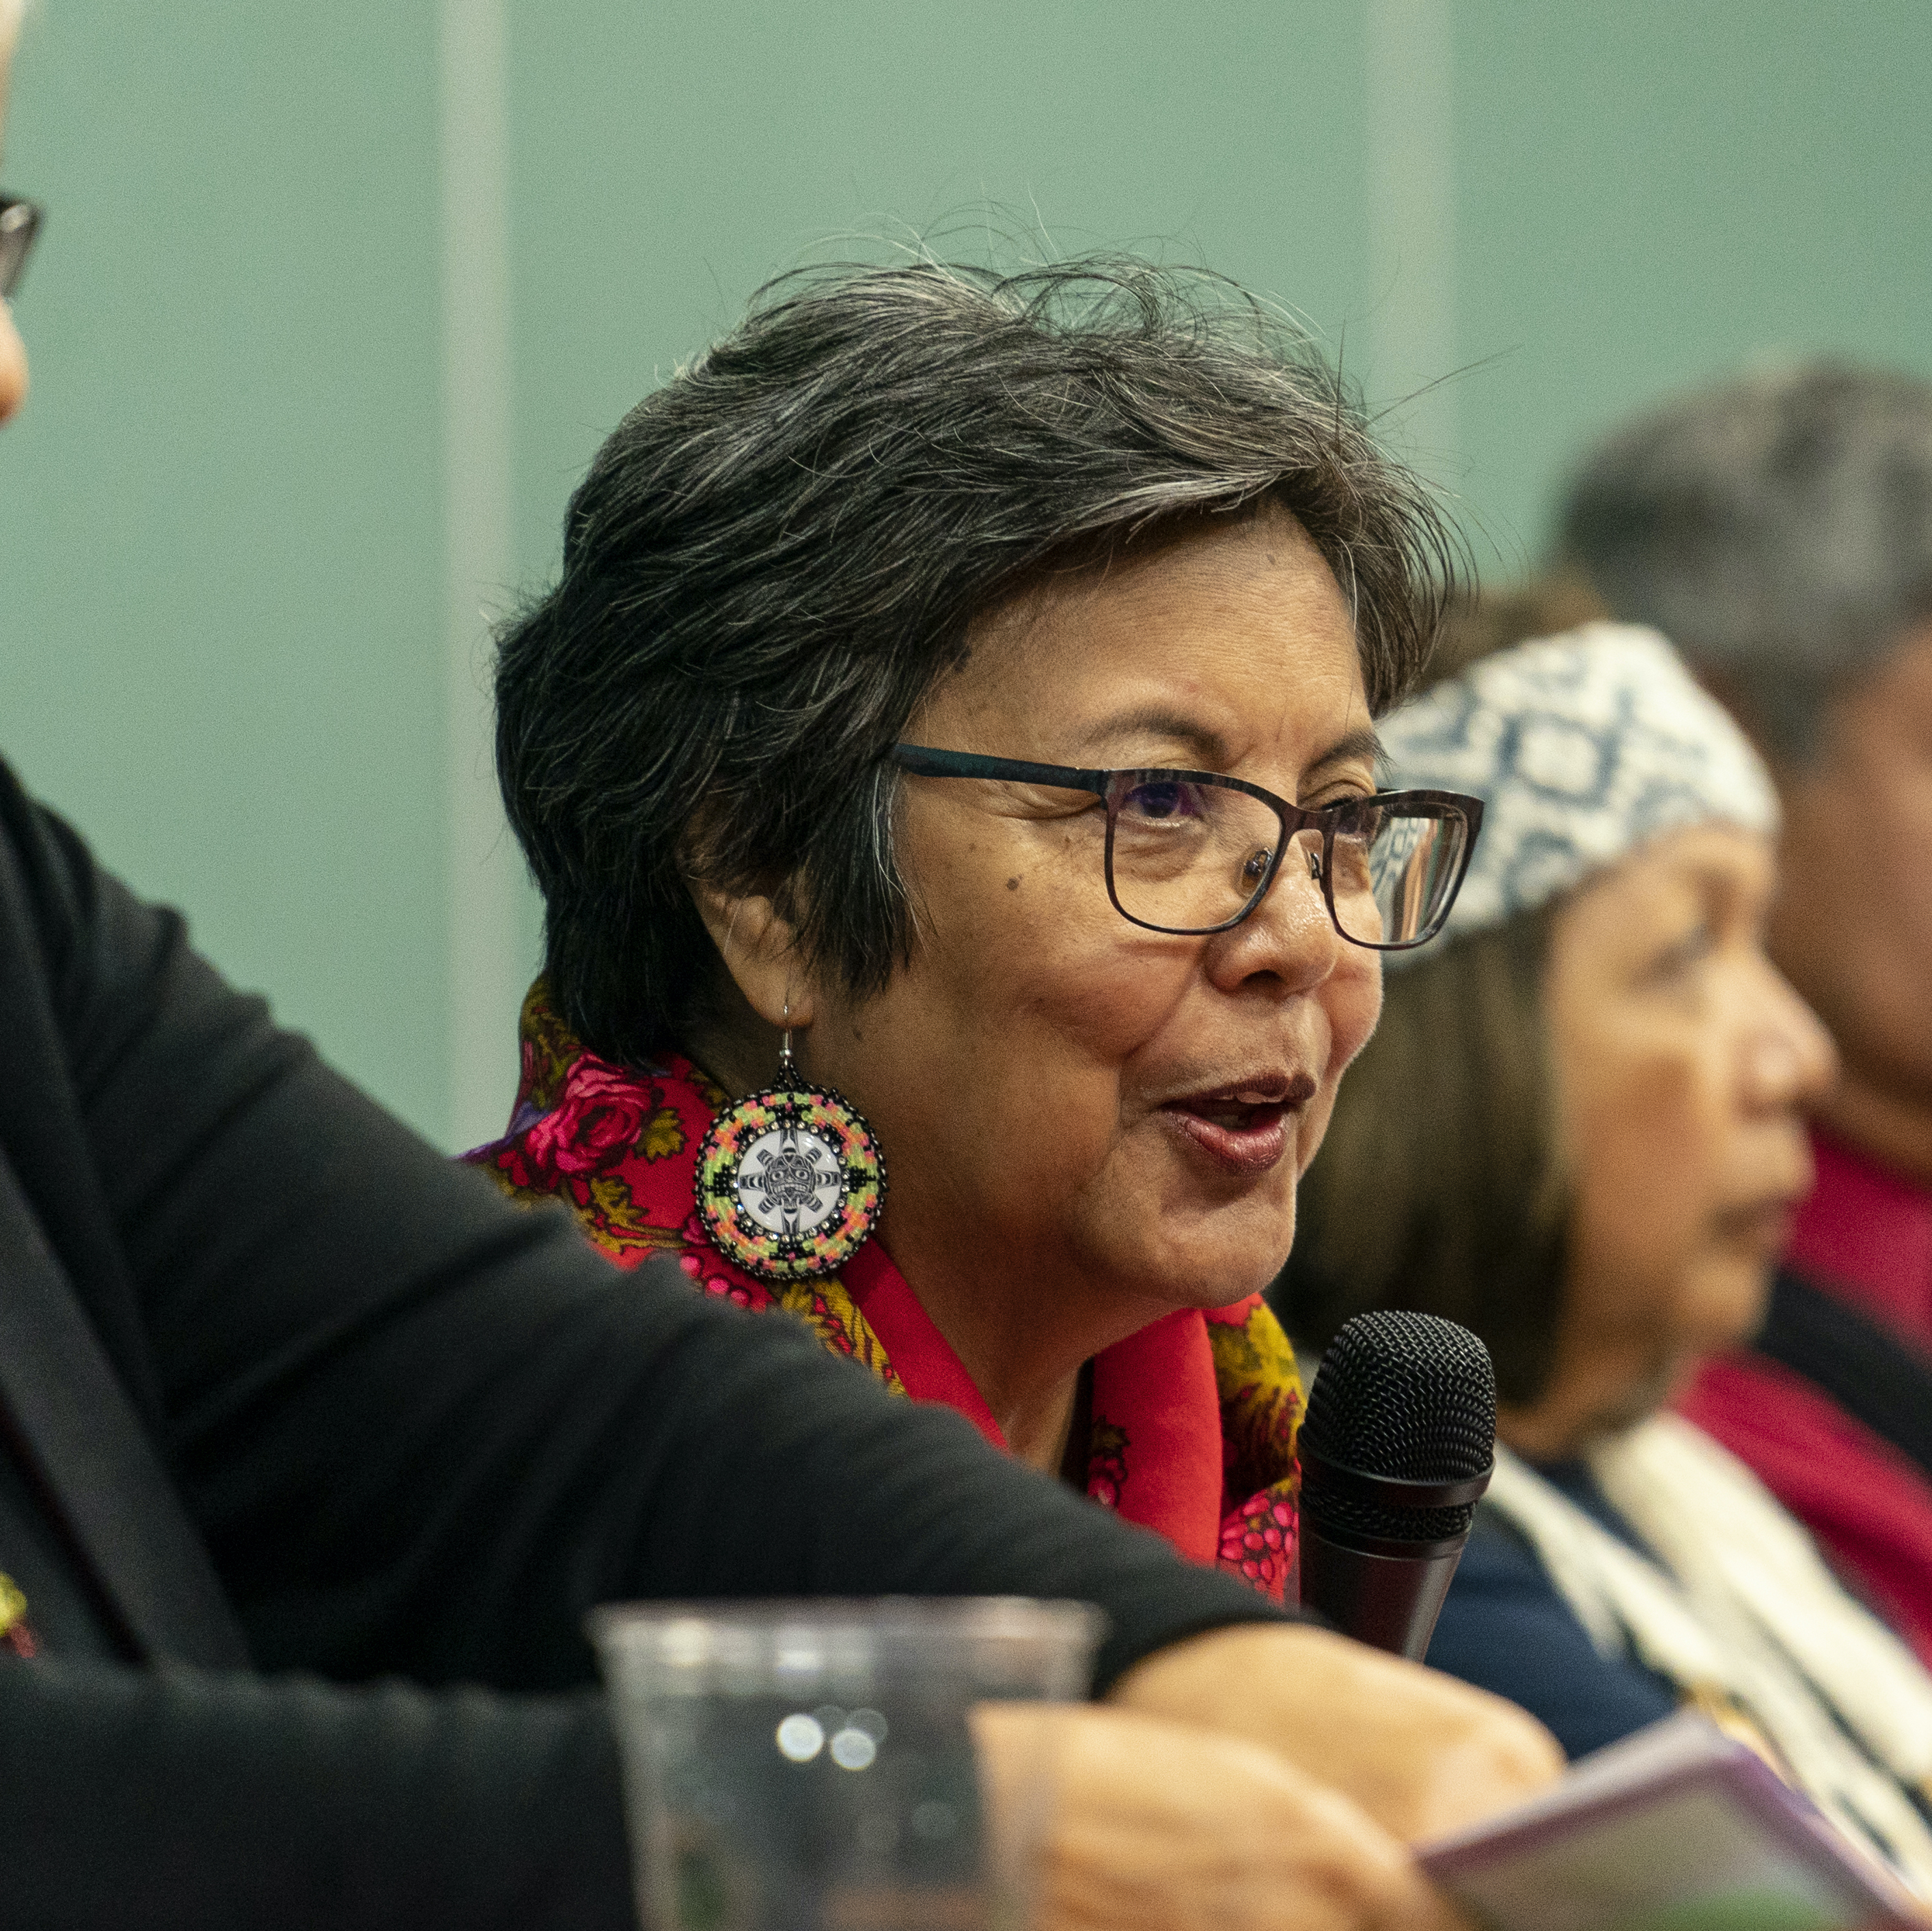 women in glasses and beaded earrings talking into a microphone